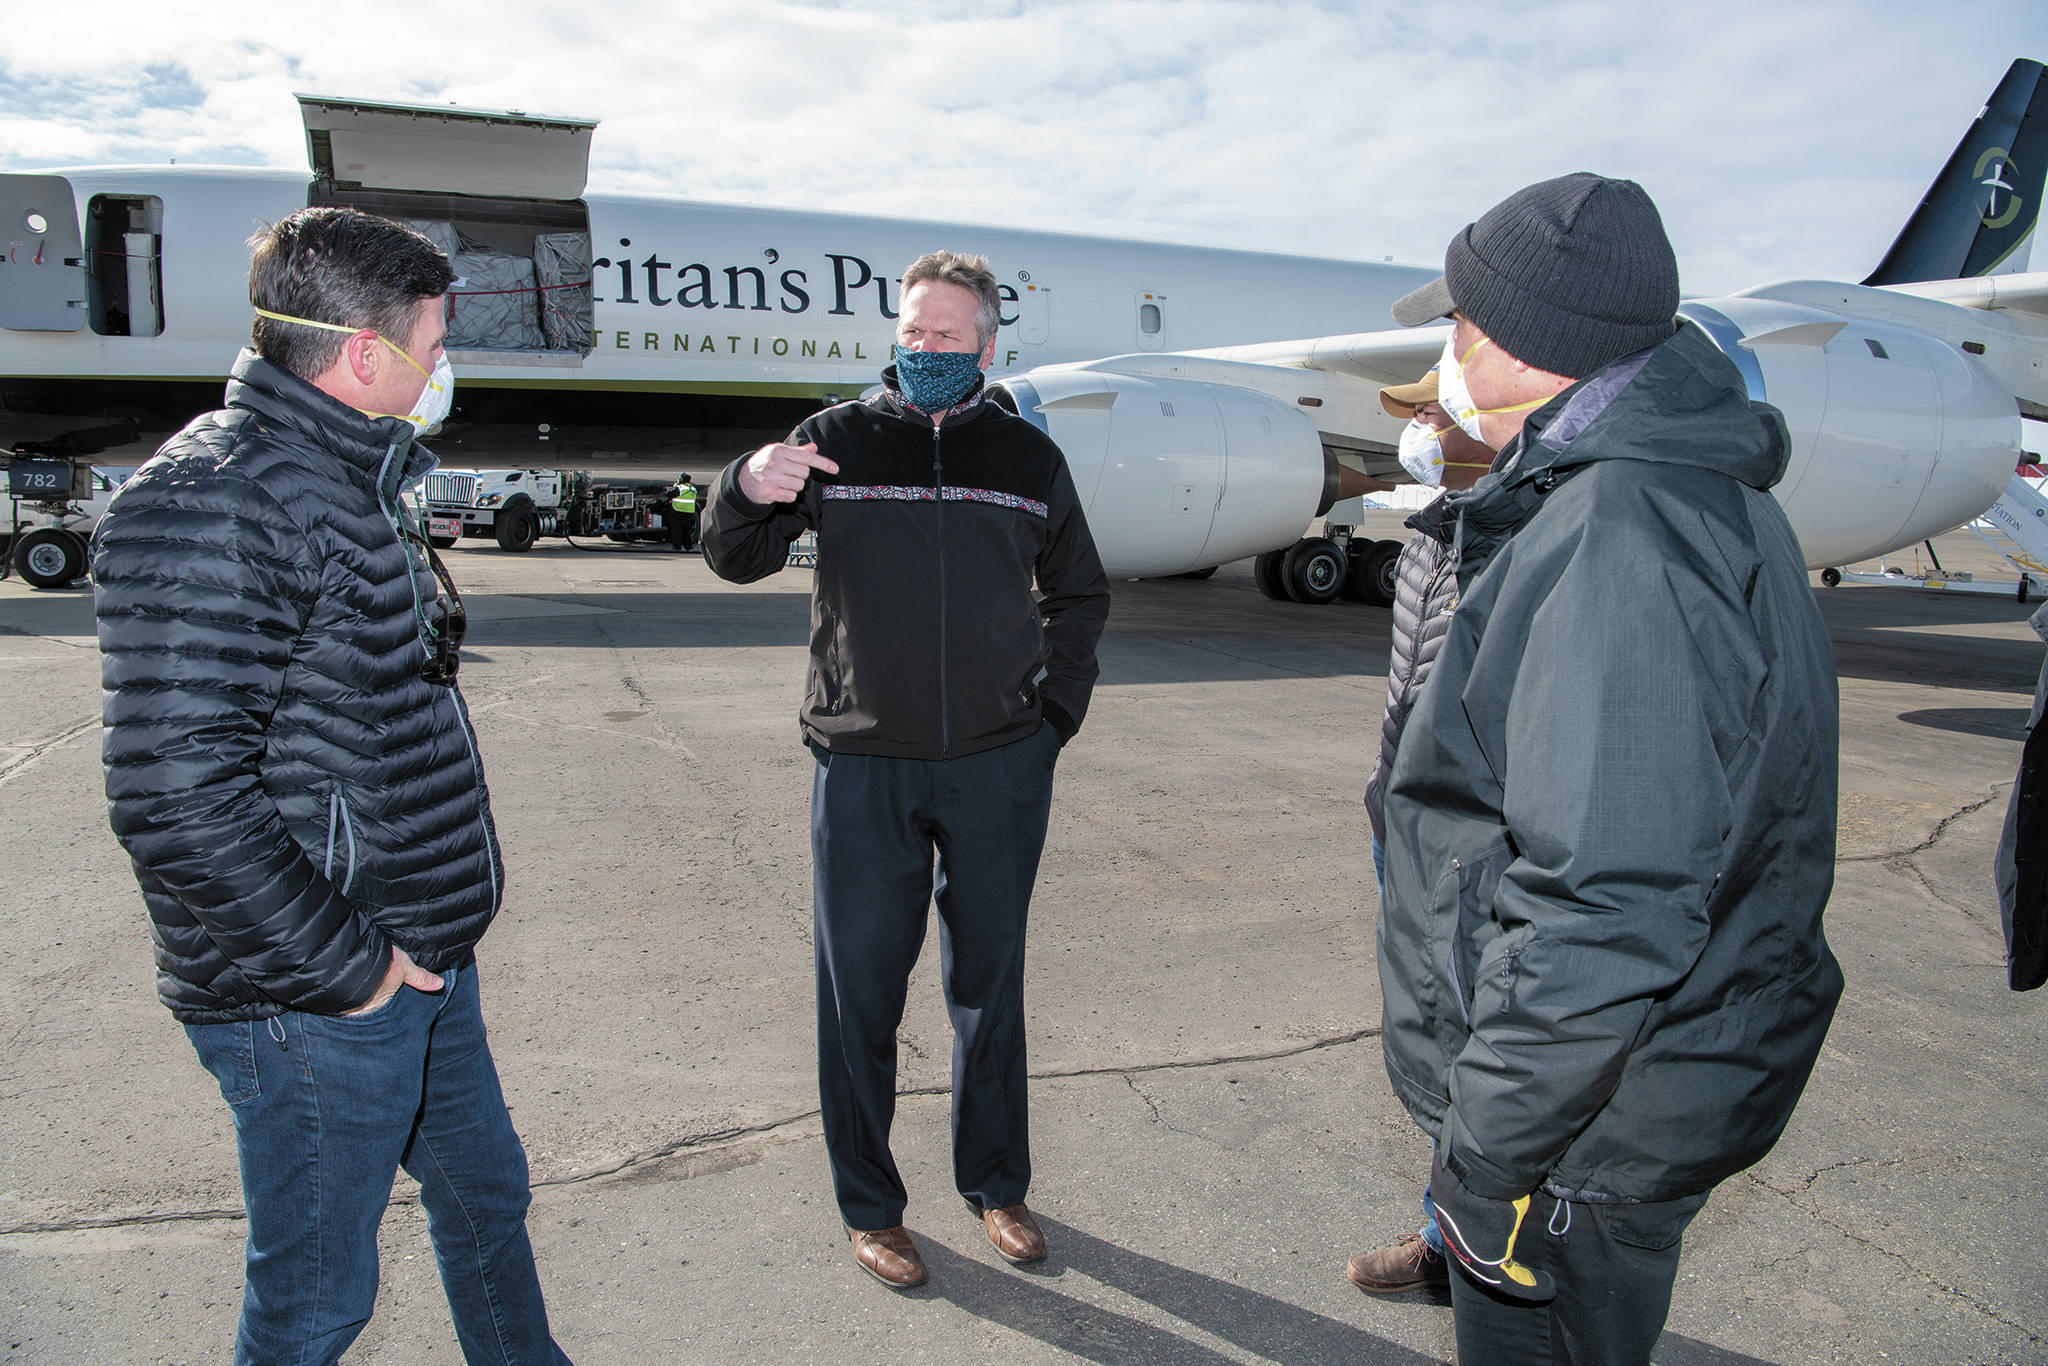 Photo courtesy Office of the Governor                                Gov. Mike Dunleavy (center) speaks with Edward Graham (left) of Samaritan’s Purse, as two other Samaritan’s Purse staff members watch. Dunleavy met the crew and staff of the Samaritan’s Purse DC-8 at Ted Stevens Anchorage International Airport as they offloaded thousands of pounds of medical supplies bound for rural Alaska.